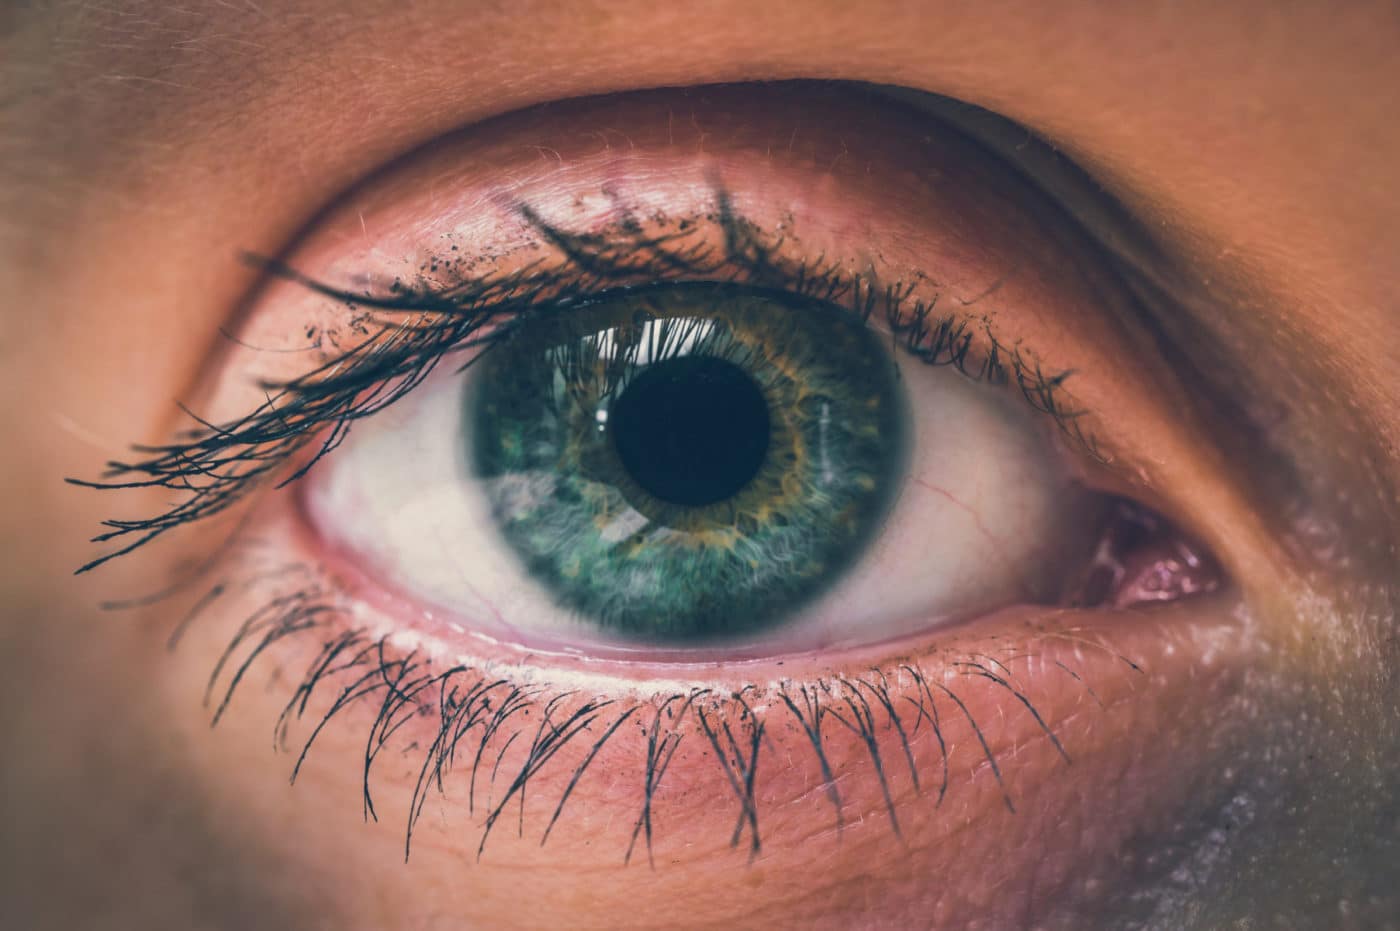 There are several different types of cataracts. Contact one of our eye doctors' offices in Flint, Lapeer, Fenton, Oxford, or Grand Blanc to schedule an eye exam or to learn more about cataracts and cataract surgery.